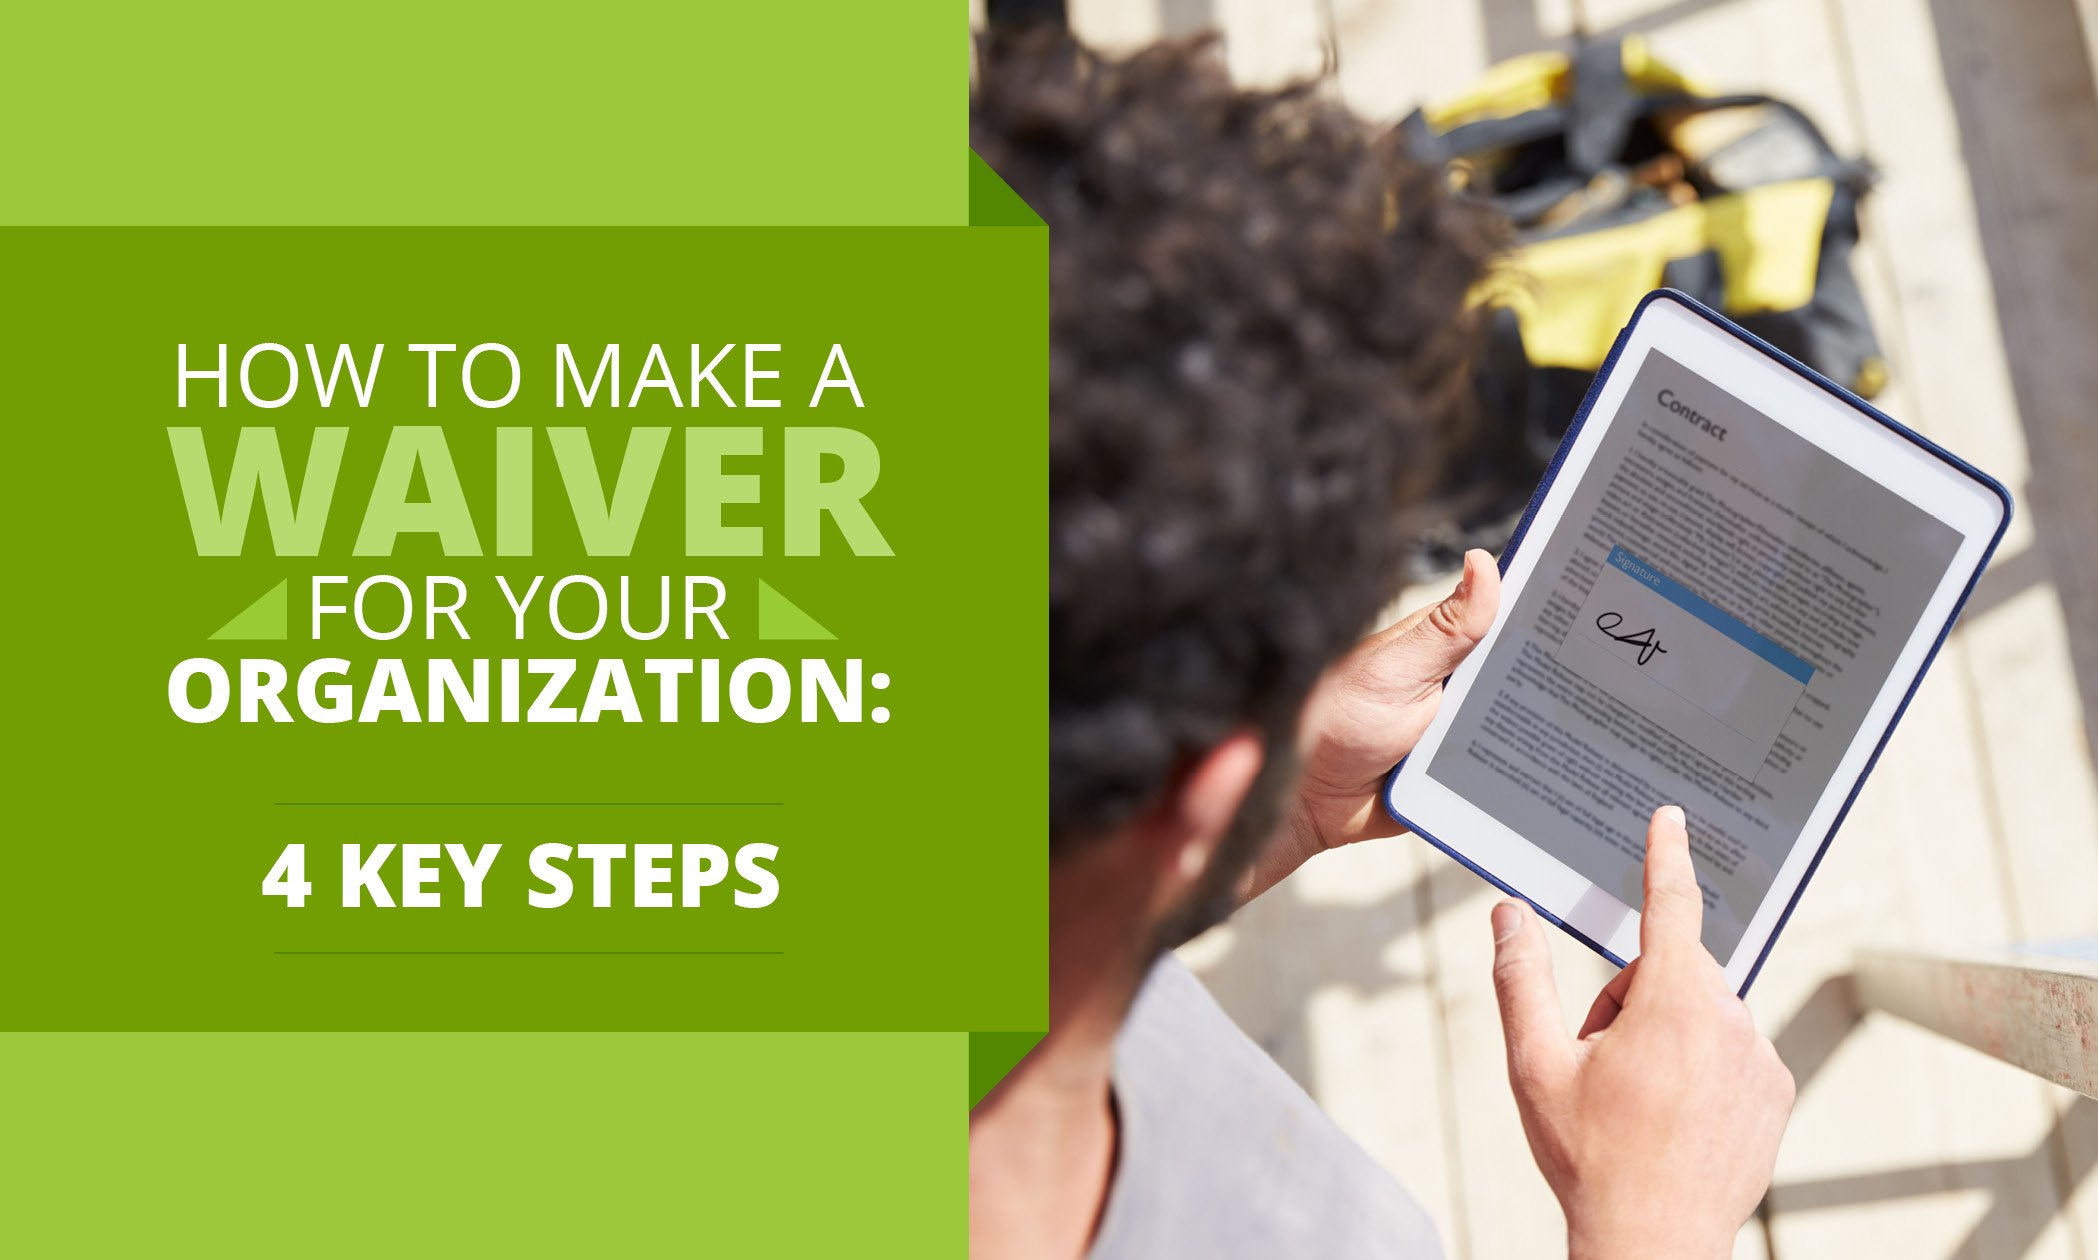 Check out this guide to learn more about how to make a waiver in four simple steps.